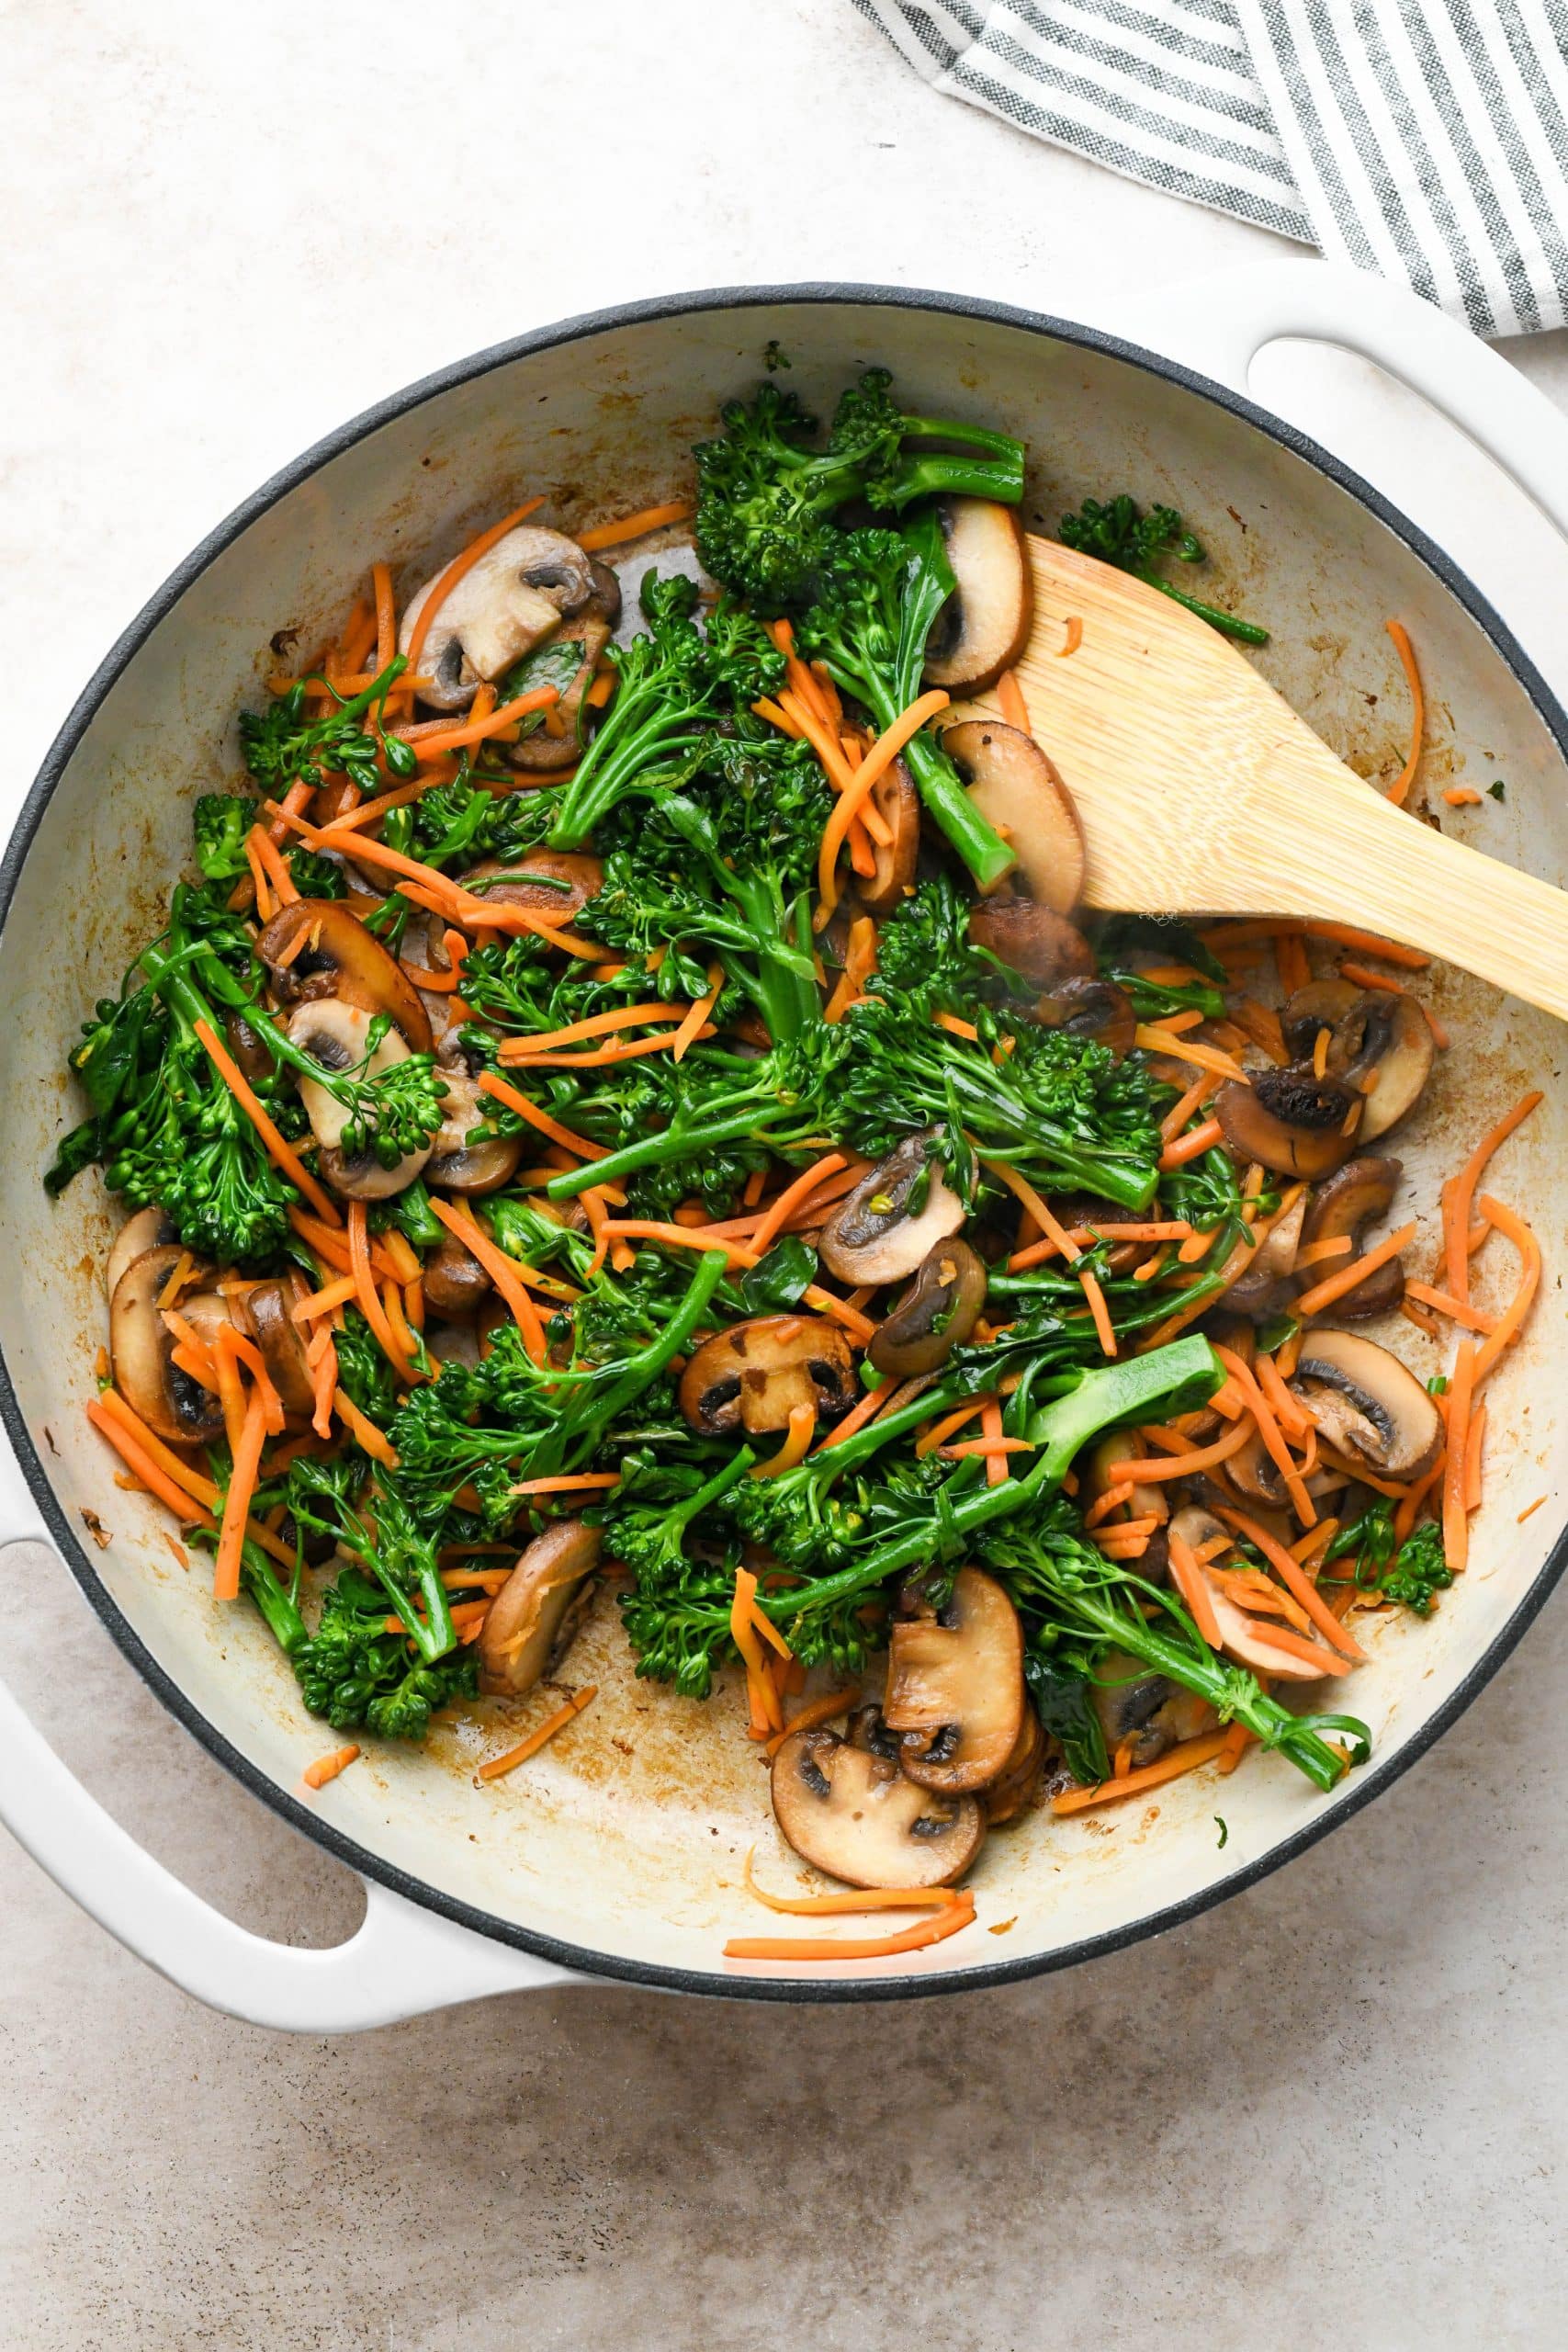 How to make soba noodle stir fry: Seared mushrooms with cooked broccoli and cooked shredded carrots in a skillet.